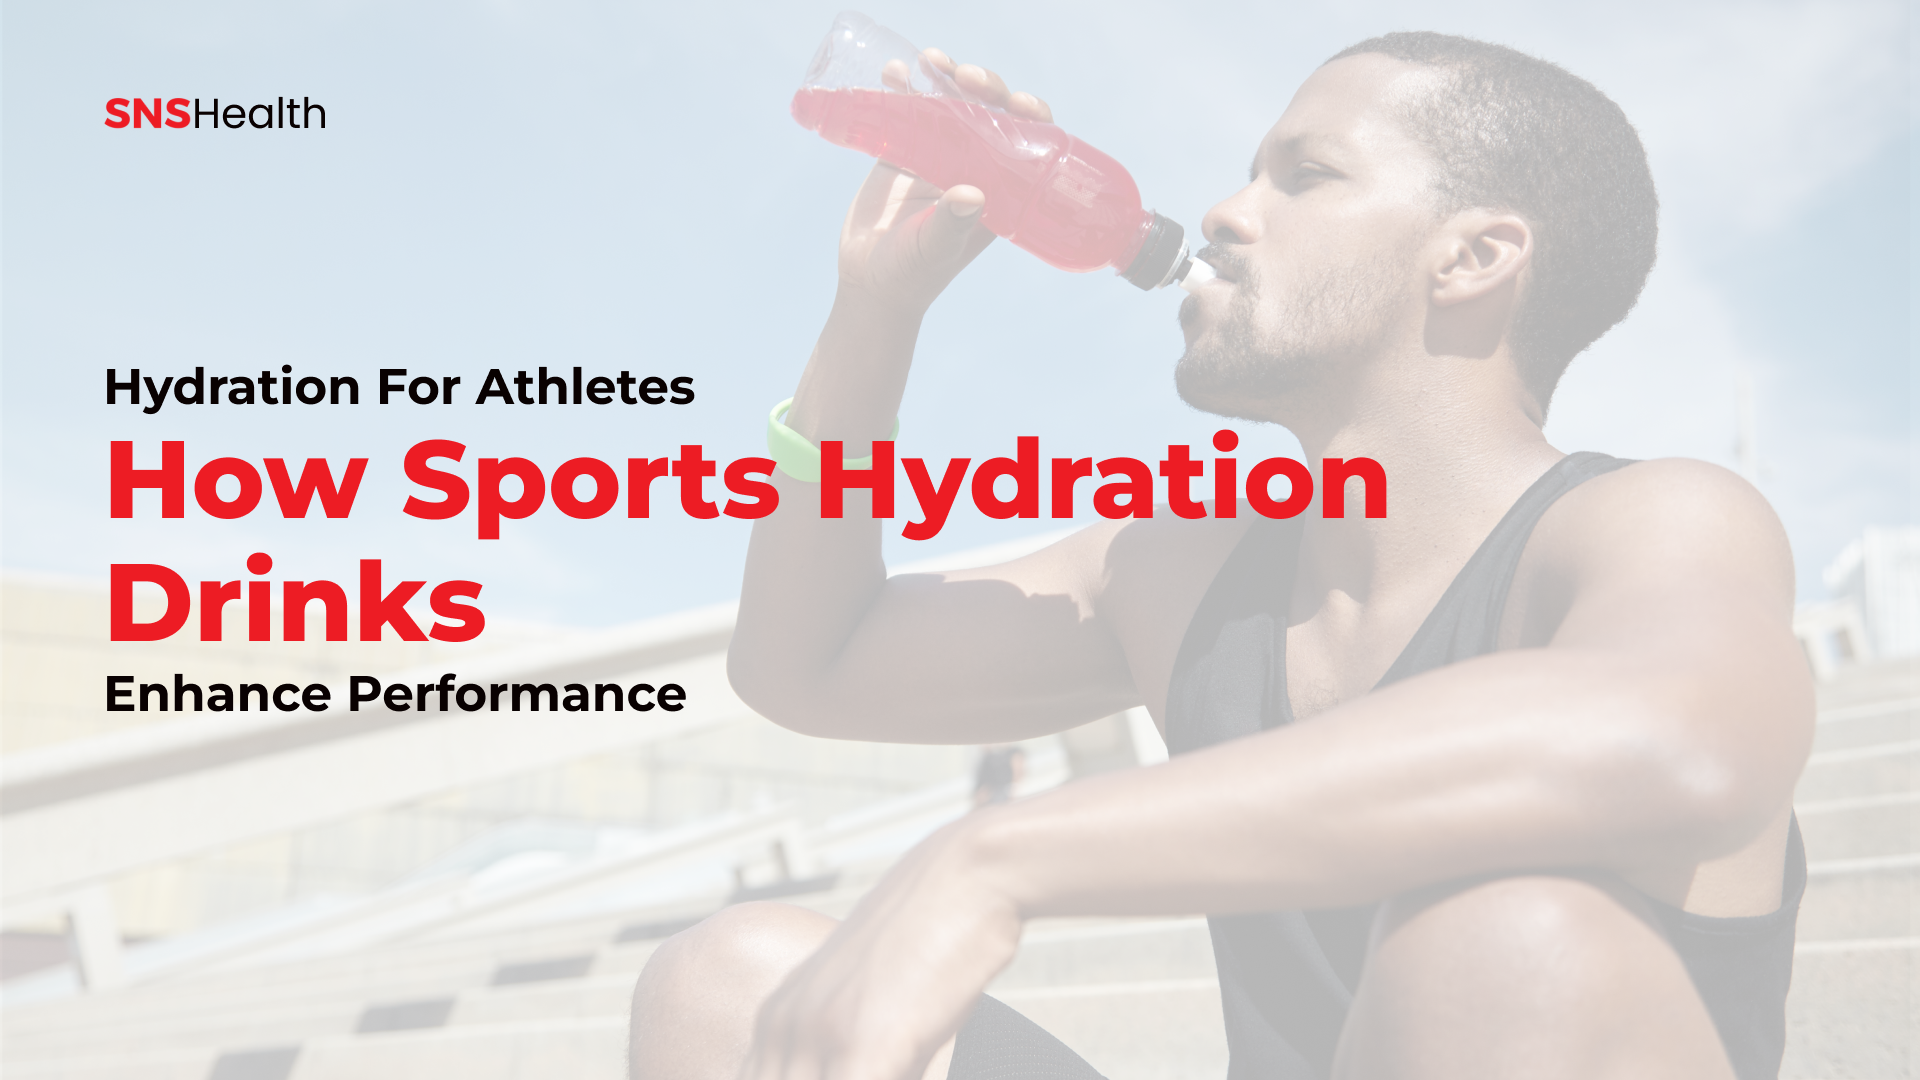 Hydration for Athletes - How Sports Hydration Drinks Enhance Performance